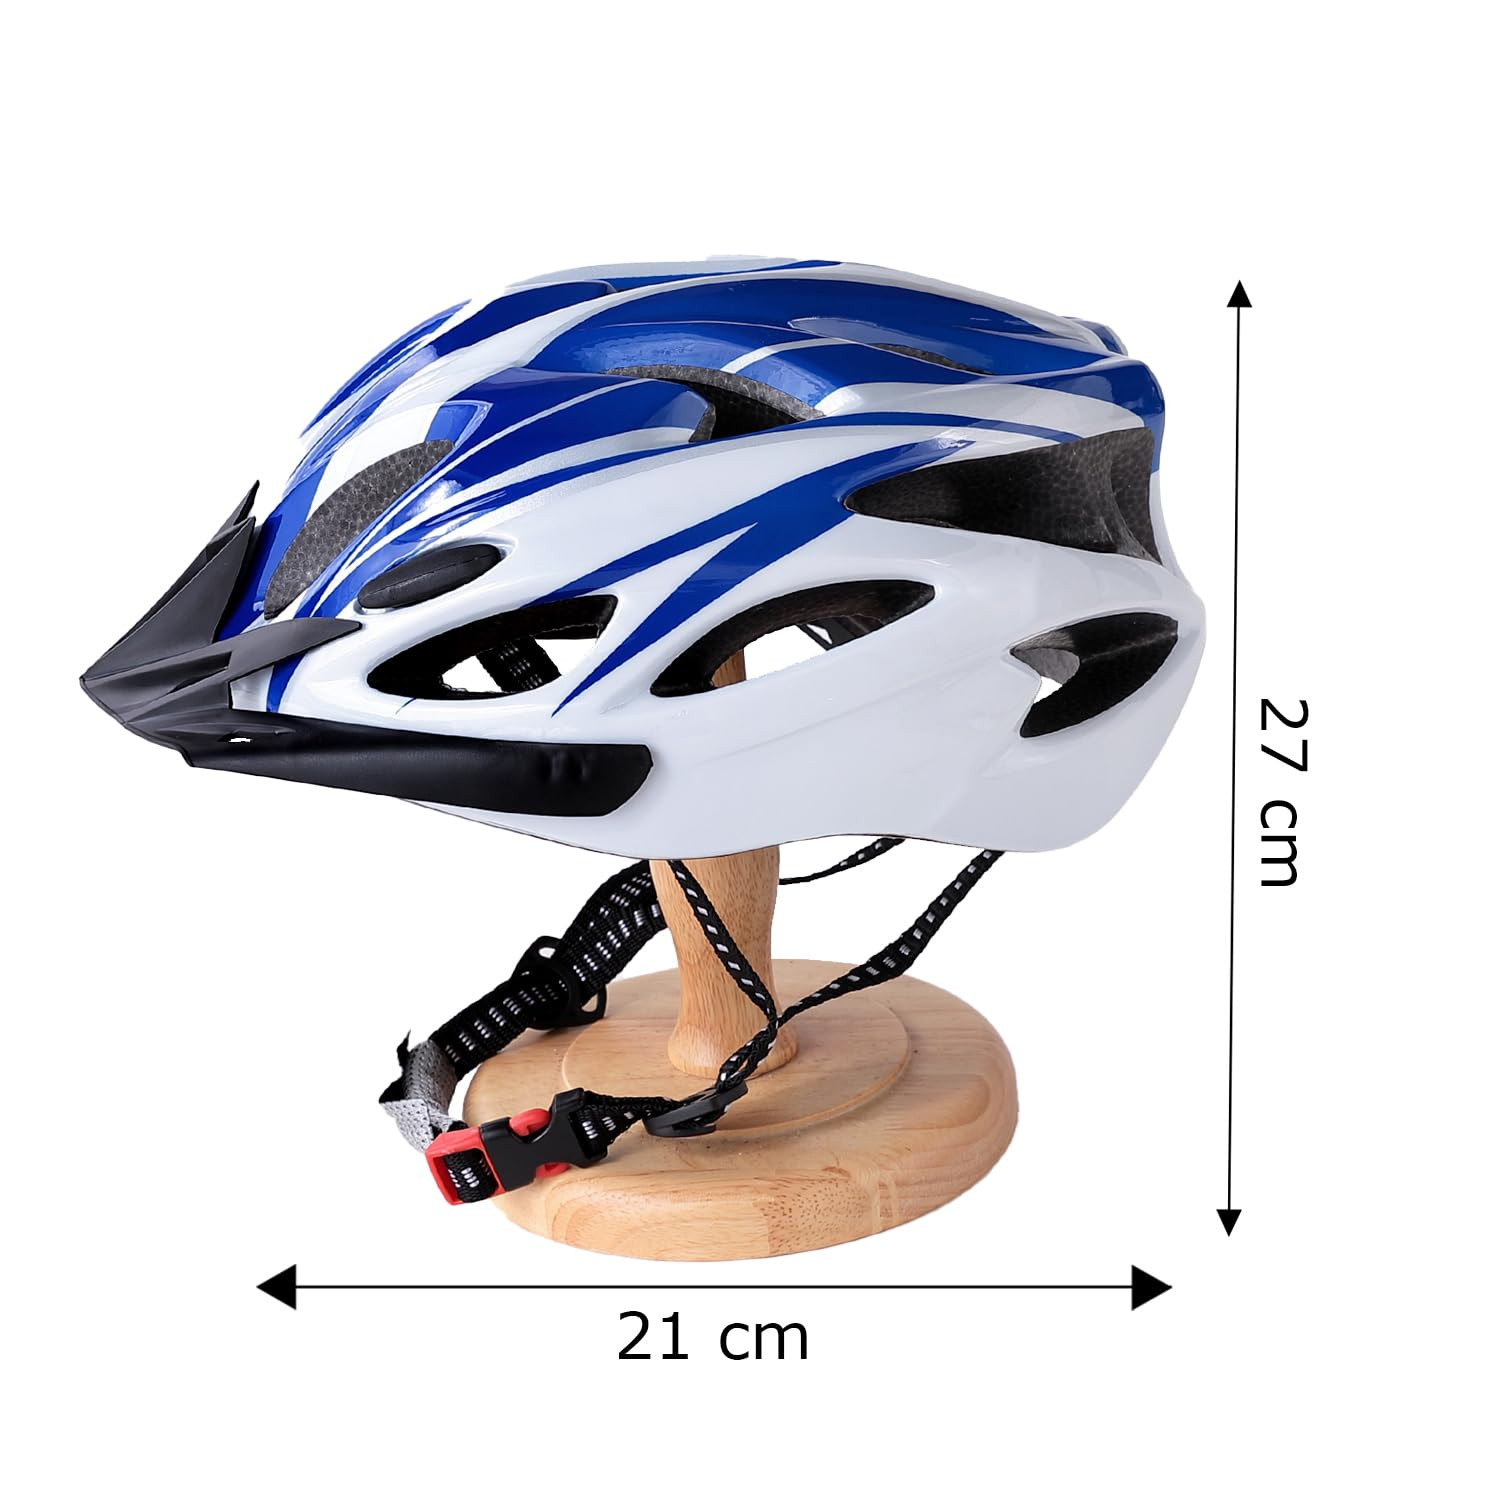 Kuber Industries Cycling Helmet with Detachable Visor|Helmet for Mountain, Road Bike & Skating|Breathable & Adjustable Bicycle Helmet|Ideal for Adults and Kids (Blue & White)